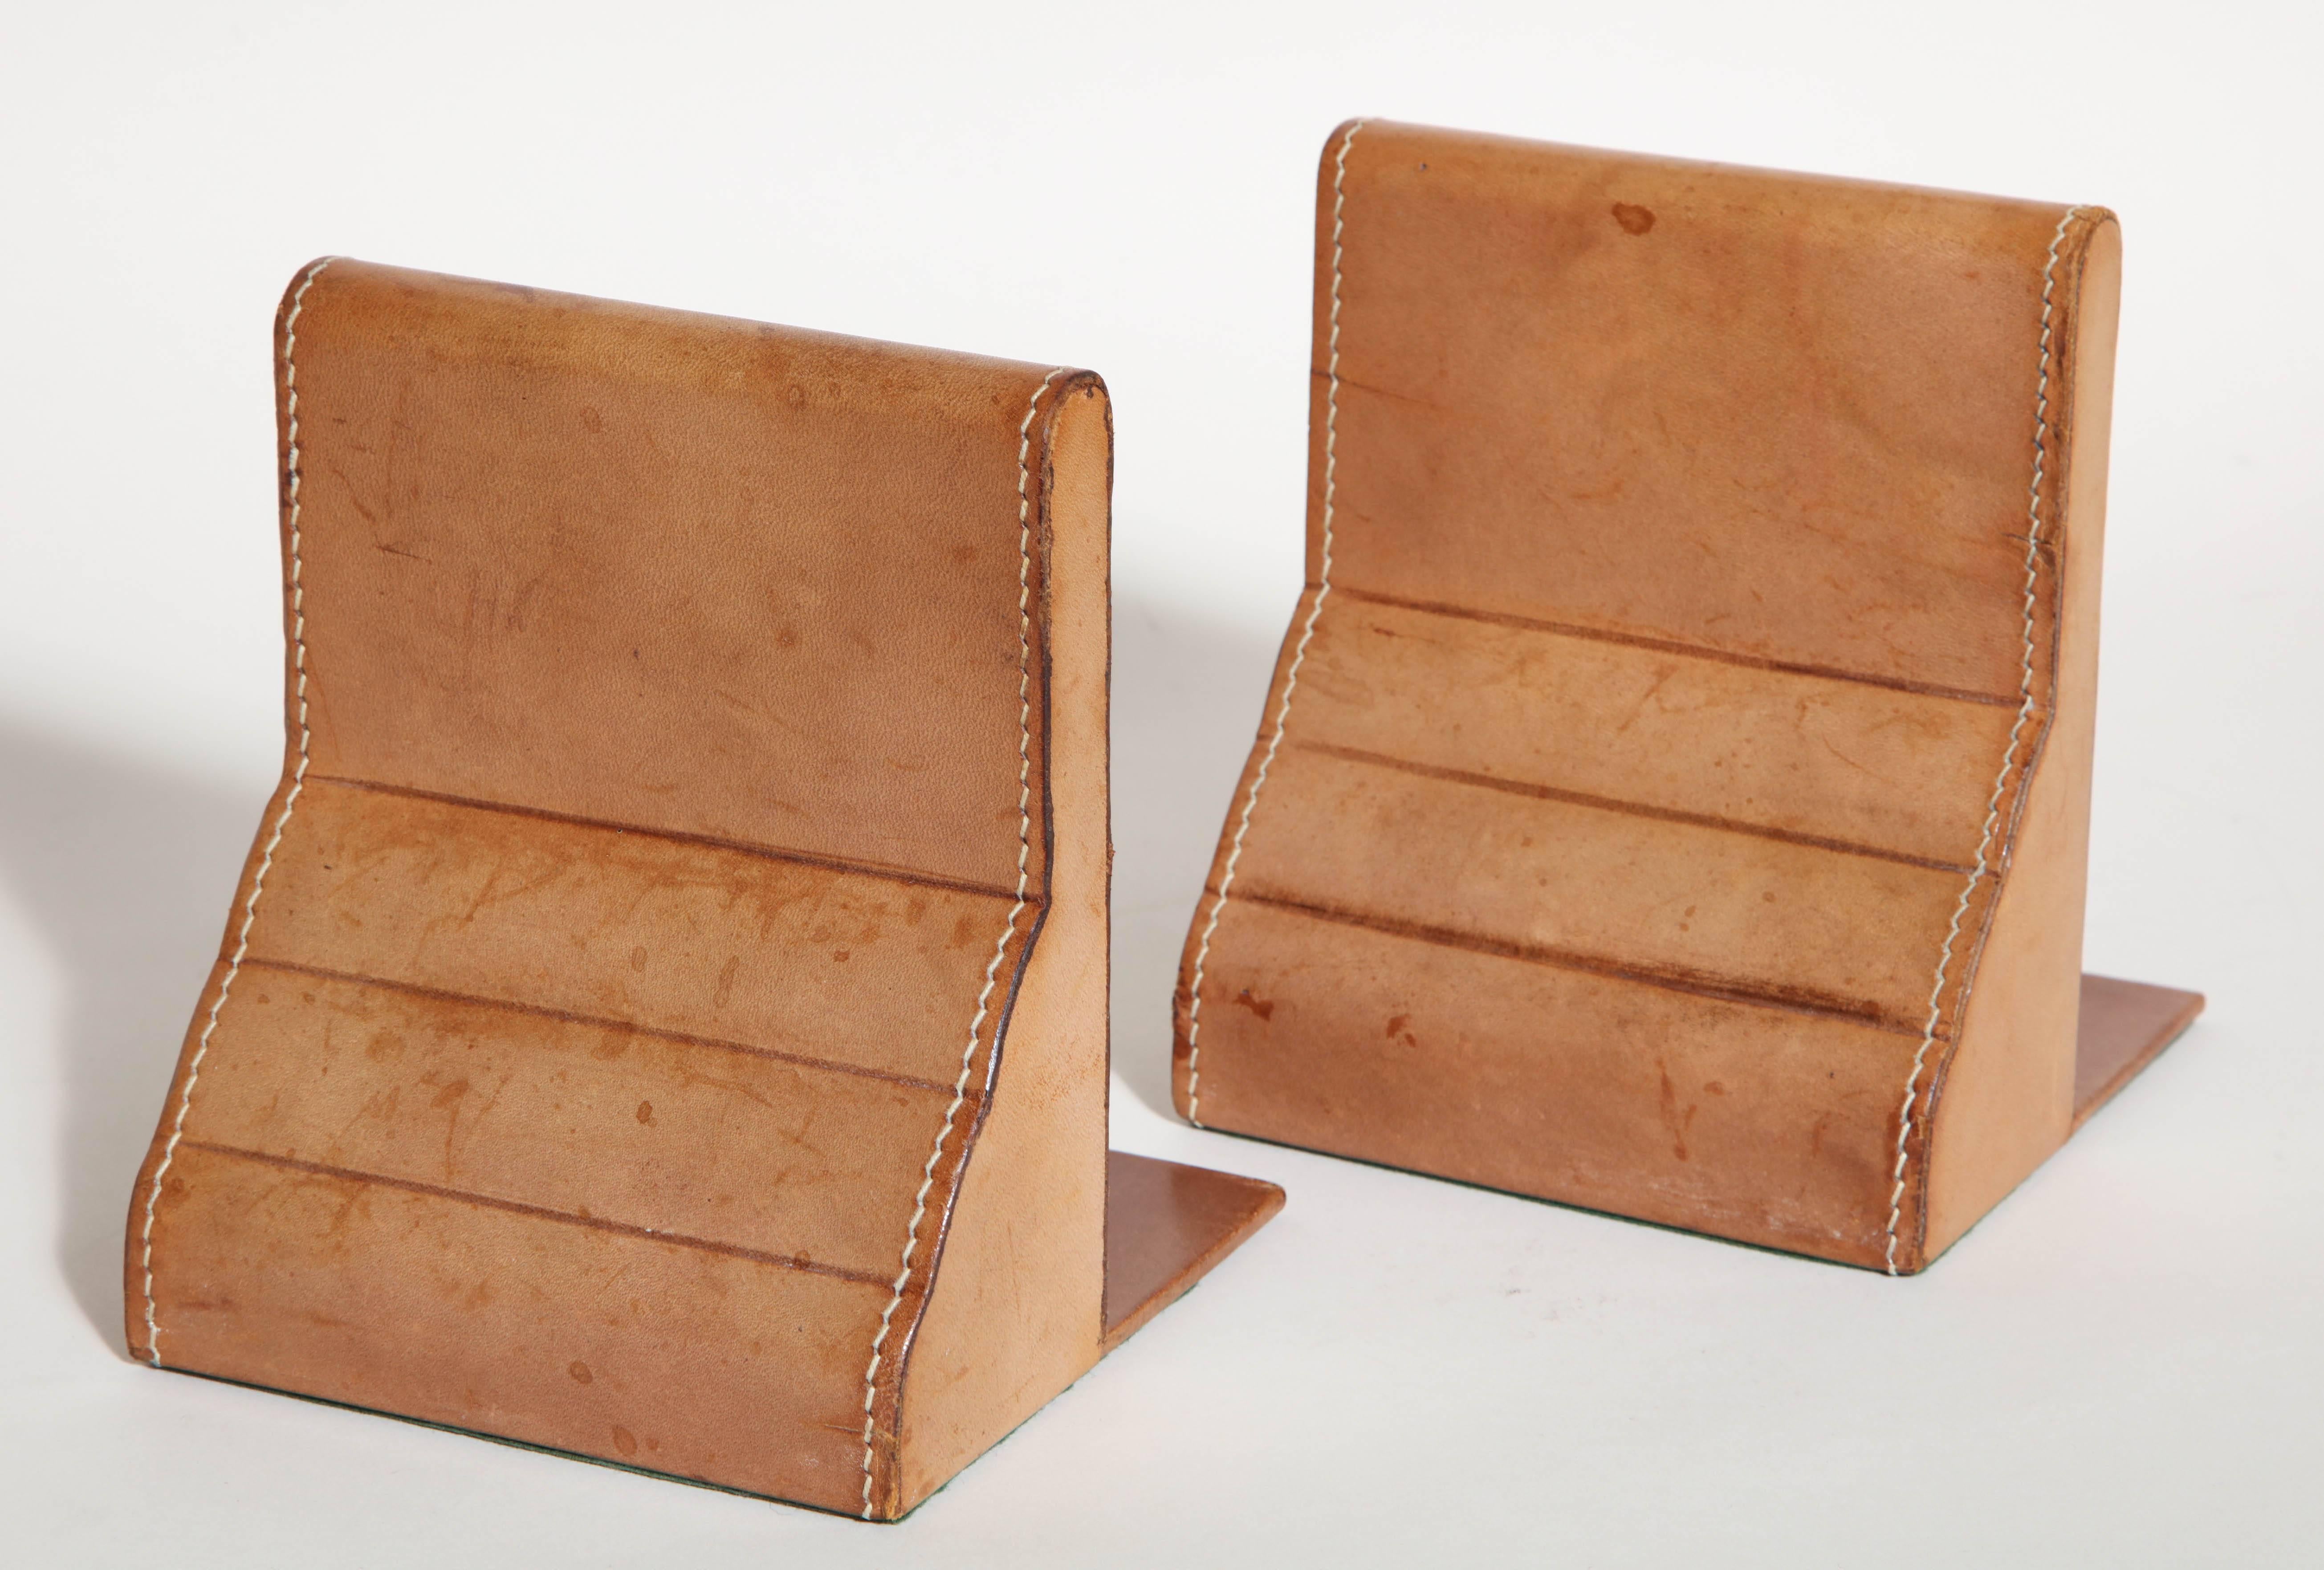 20th Century English Art Deco Hand-Sewn Leather Bookends